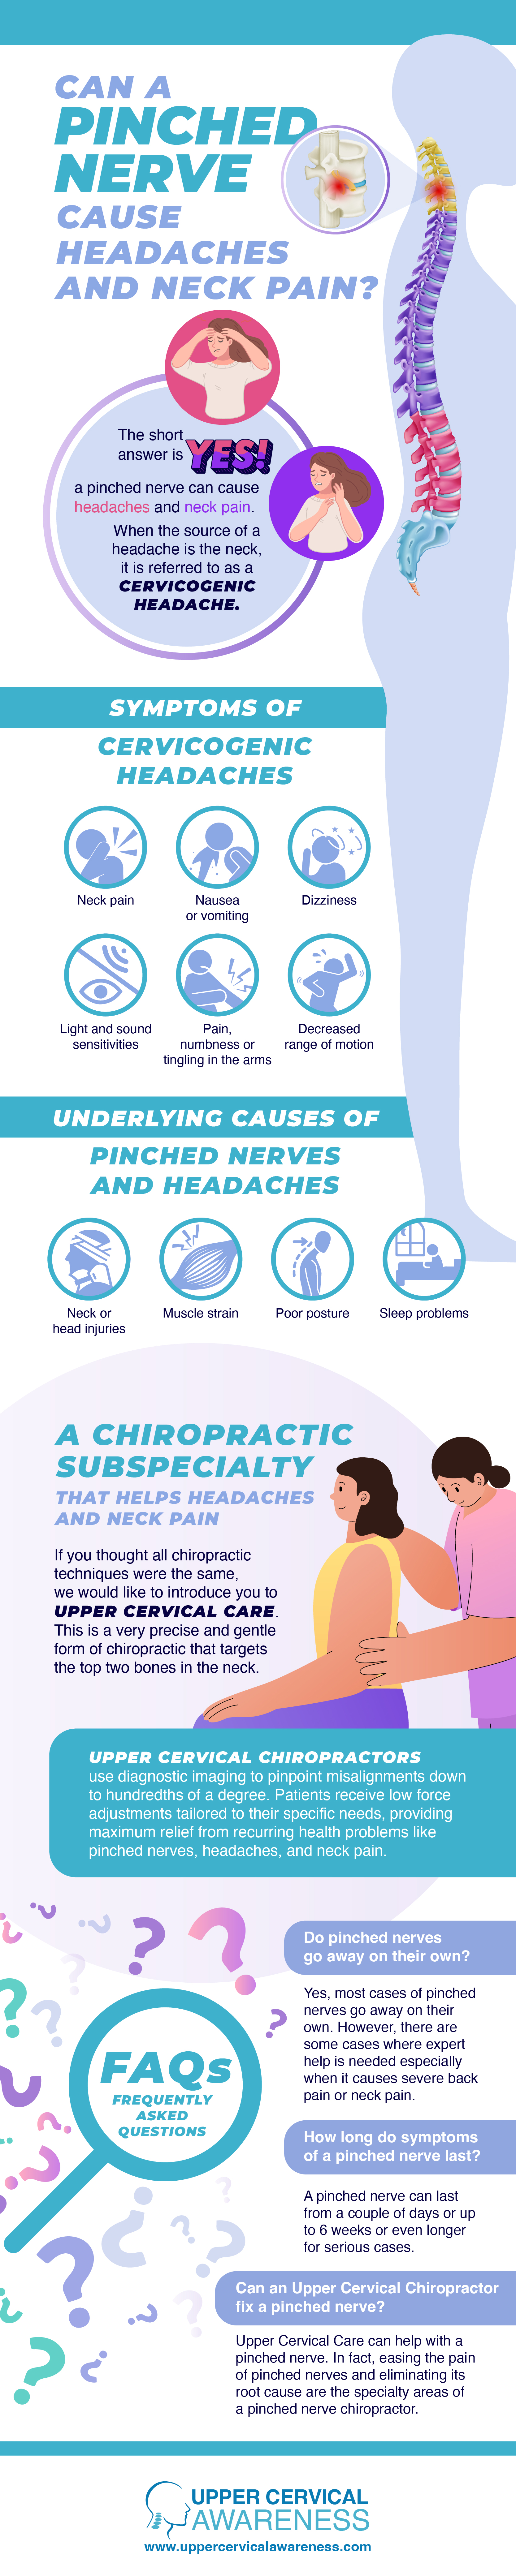 chiropractor in Encinitas, pinched nerve relief infographic